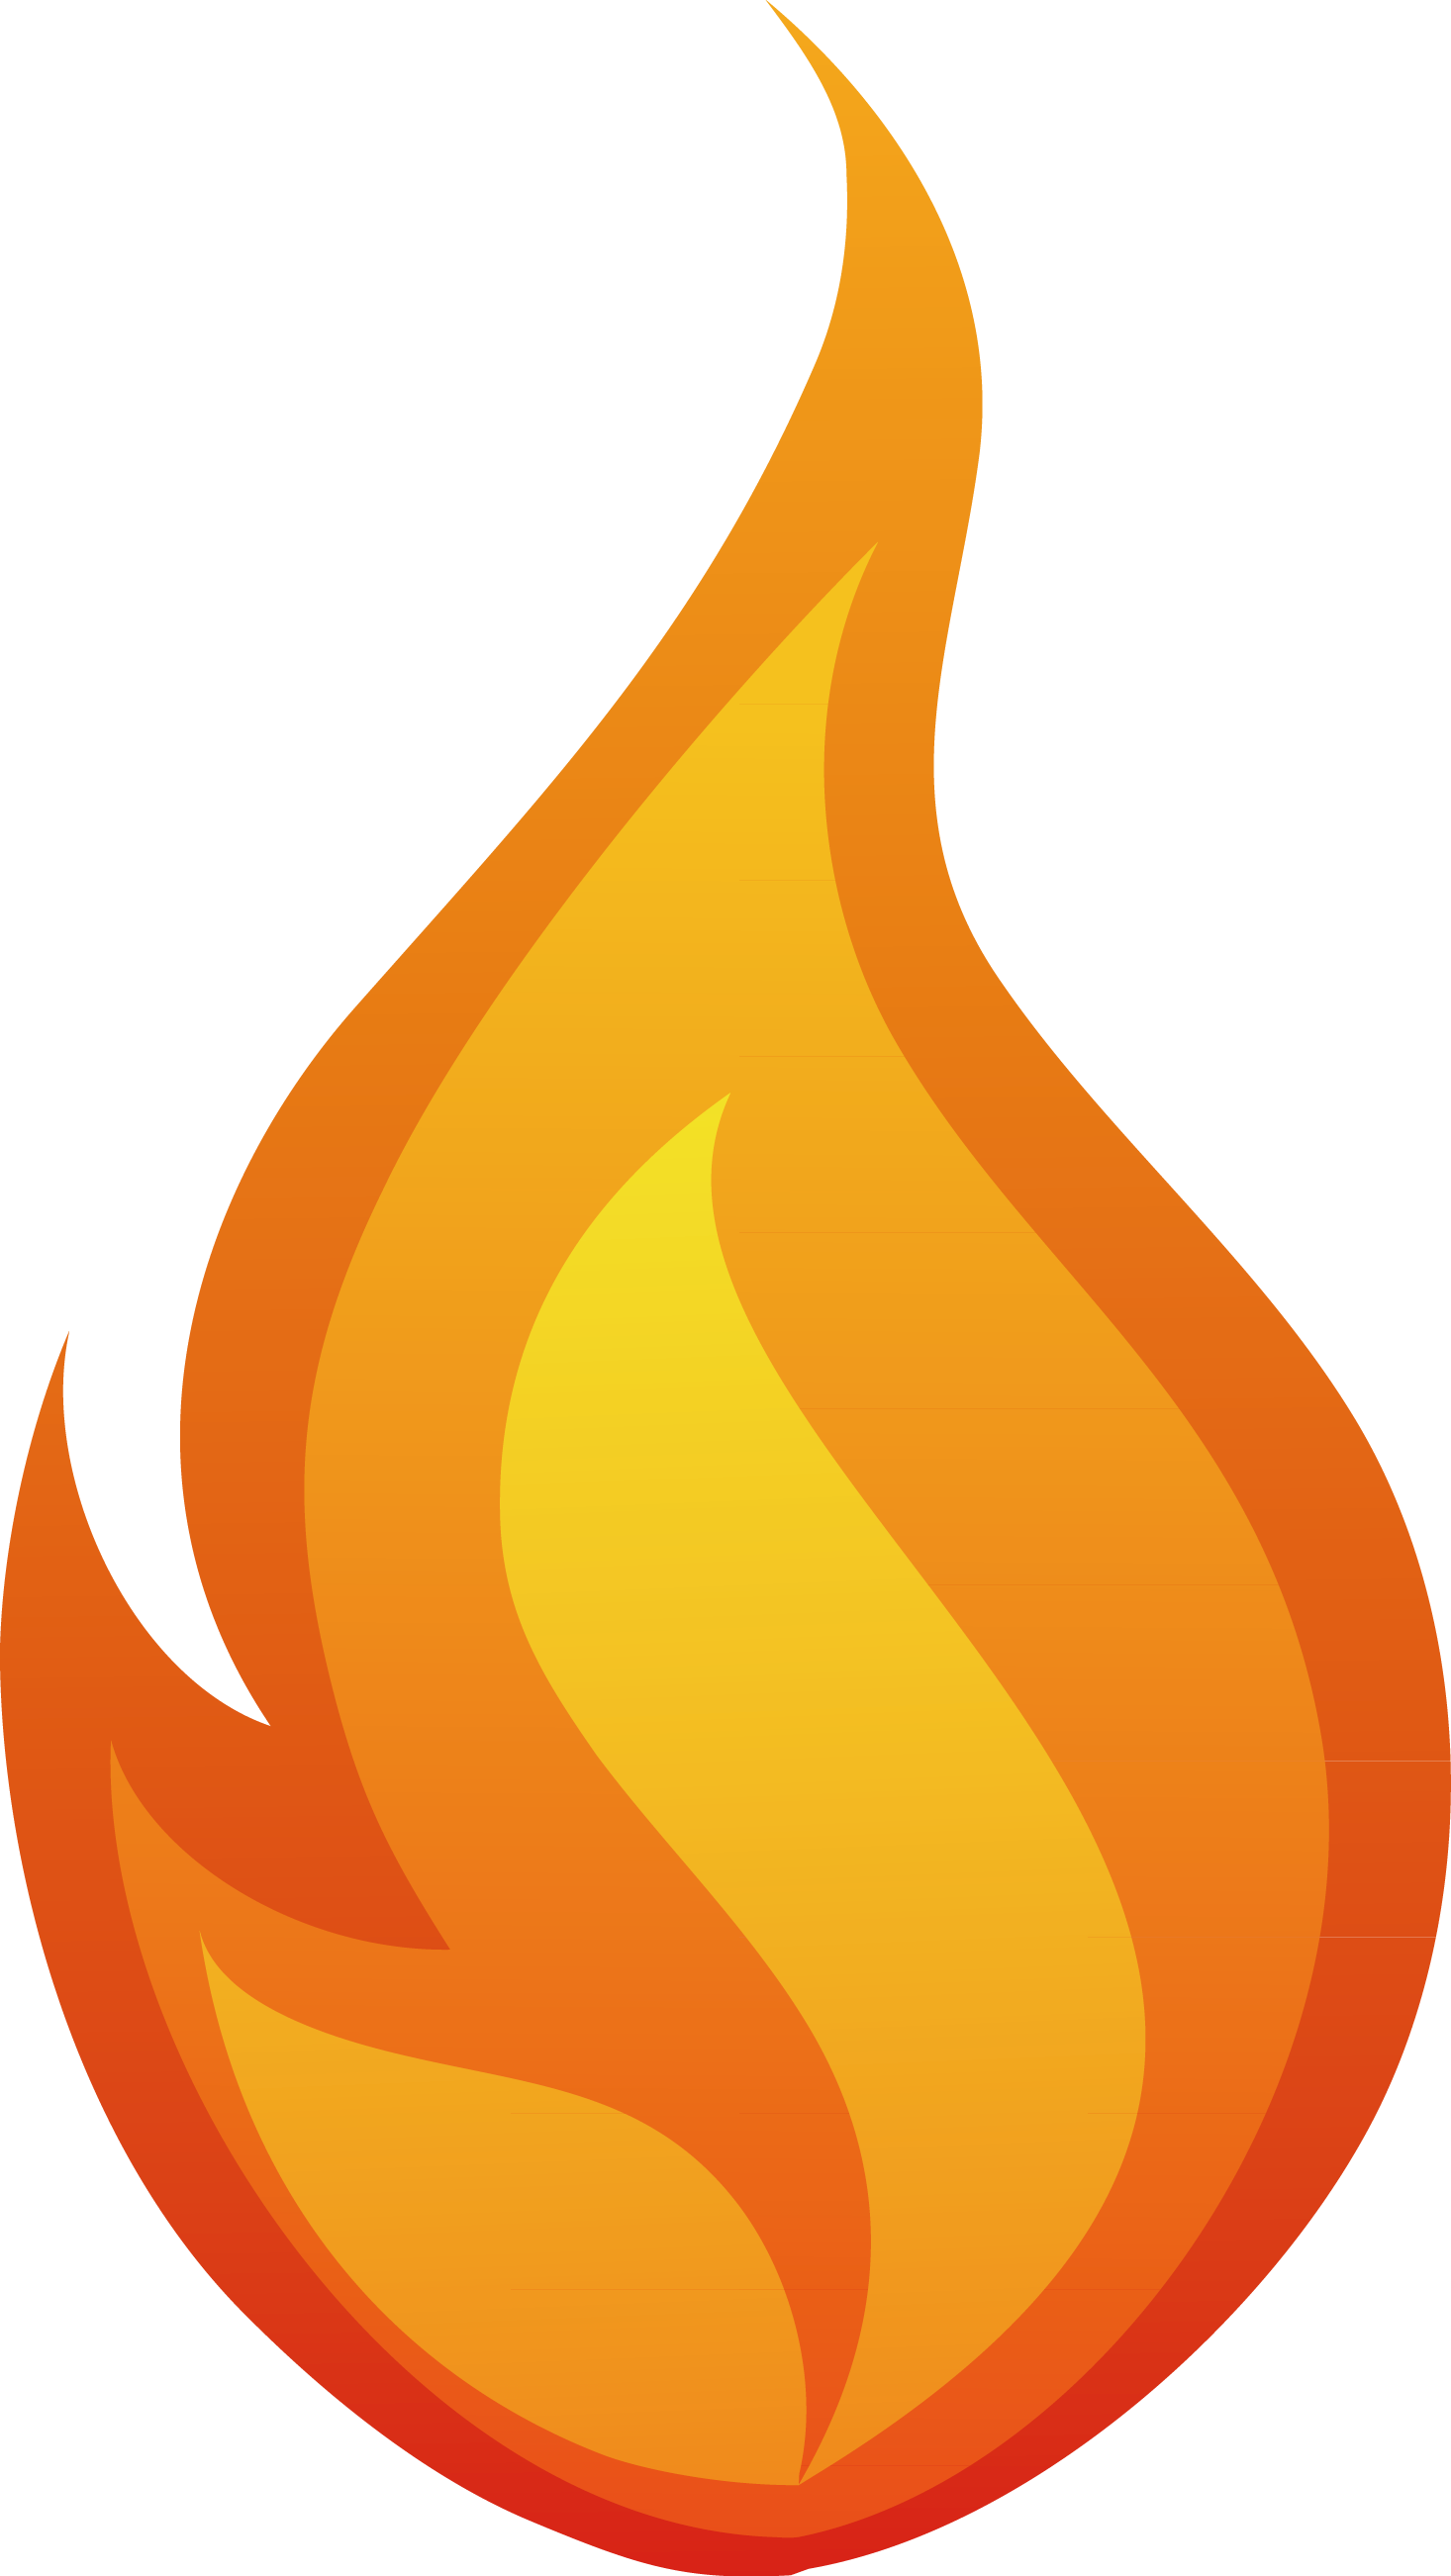 Flame Fire Clip art Flame hand painted vector png